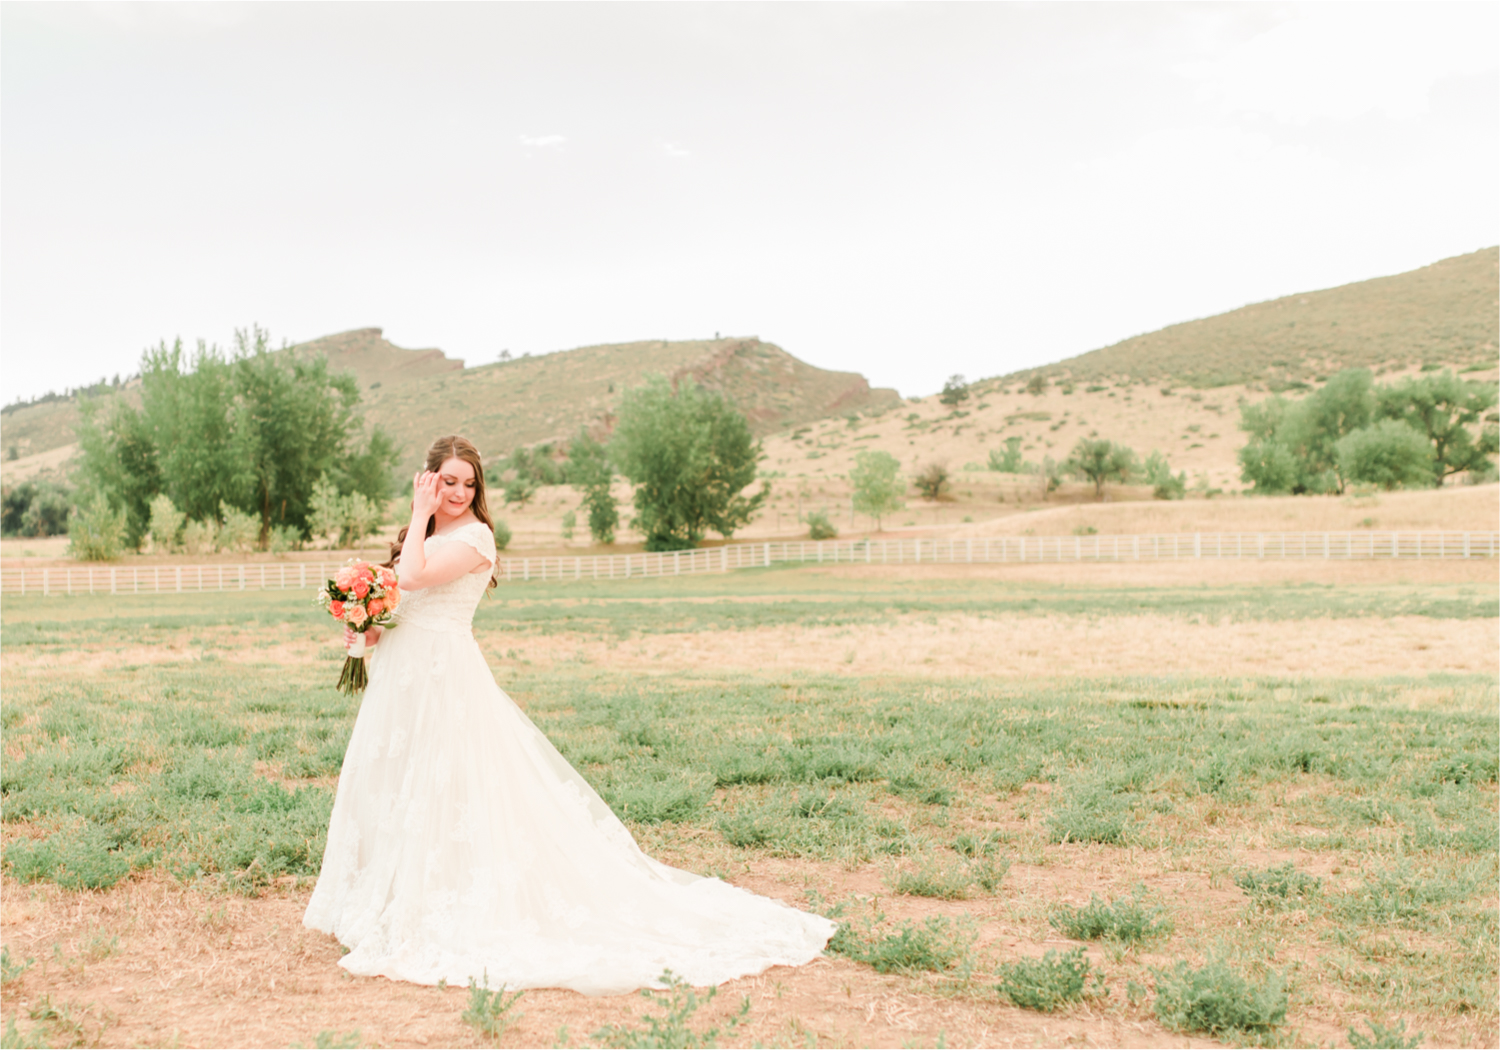 Summer Ellis Ranch Wedding in Loveland Colorado | Britni Girard Photography | Wedding Photo and Video Team | Bride hair Dondi AtWow from Sola Salon in Loveland | Floral hair crystals | Bridal Portraits | Orange Bouquet | Country Field Bride